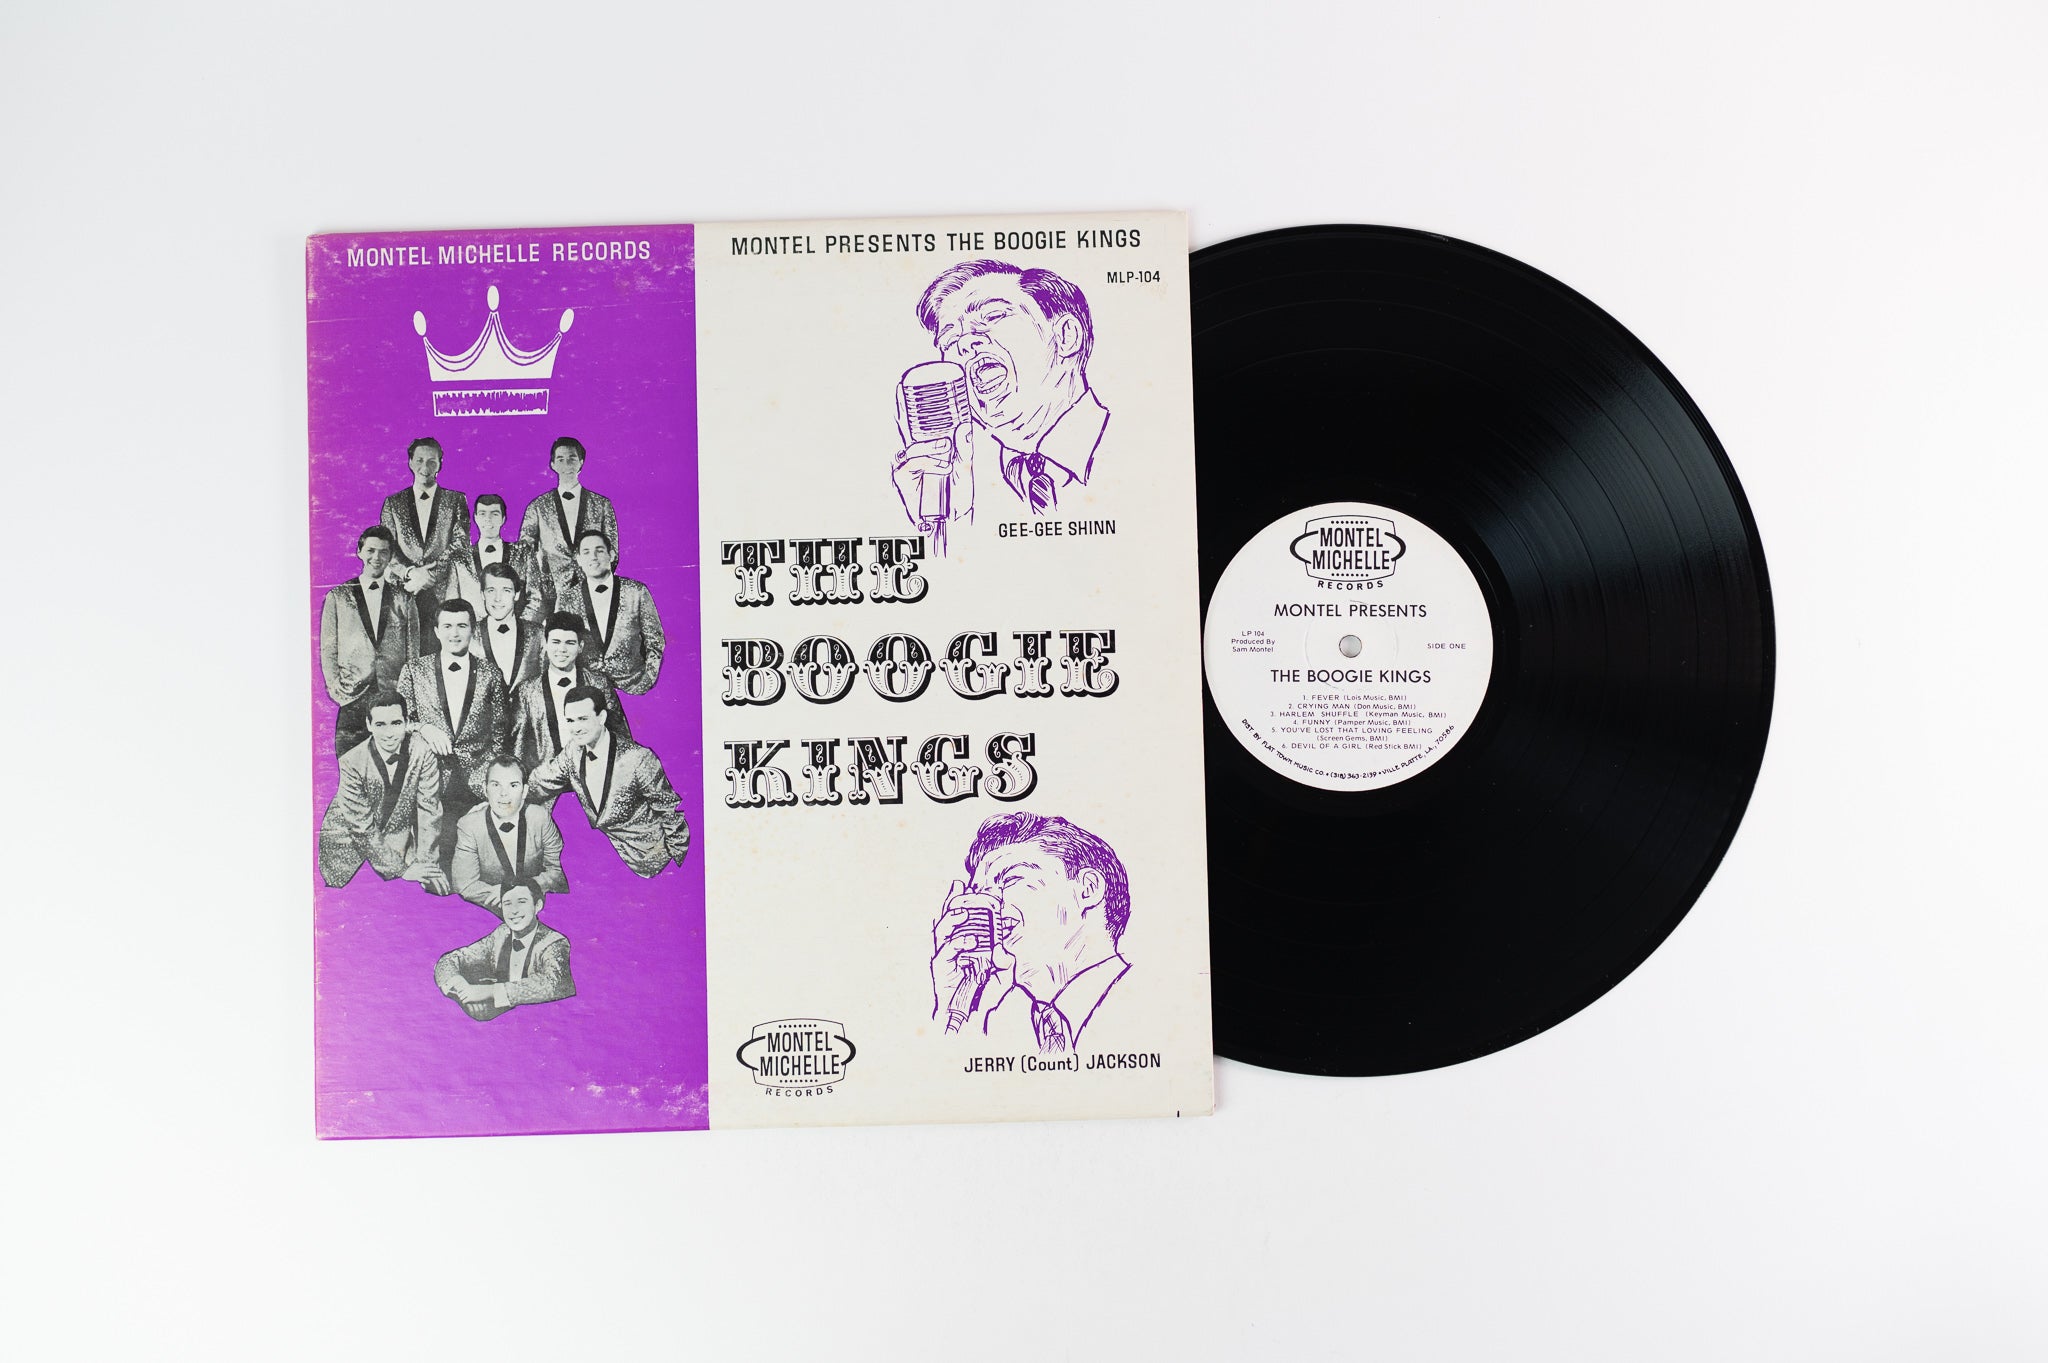 The Boogie Kings - The Boogie Kings on Montel Michelle